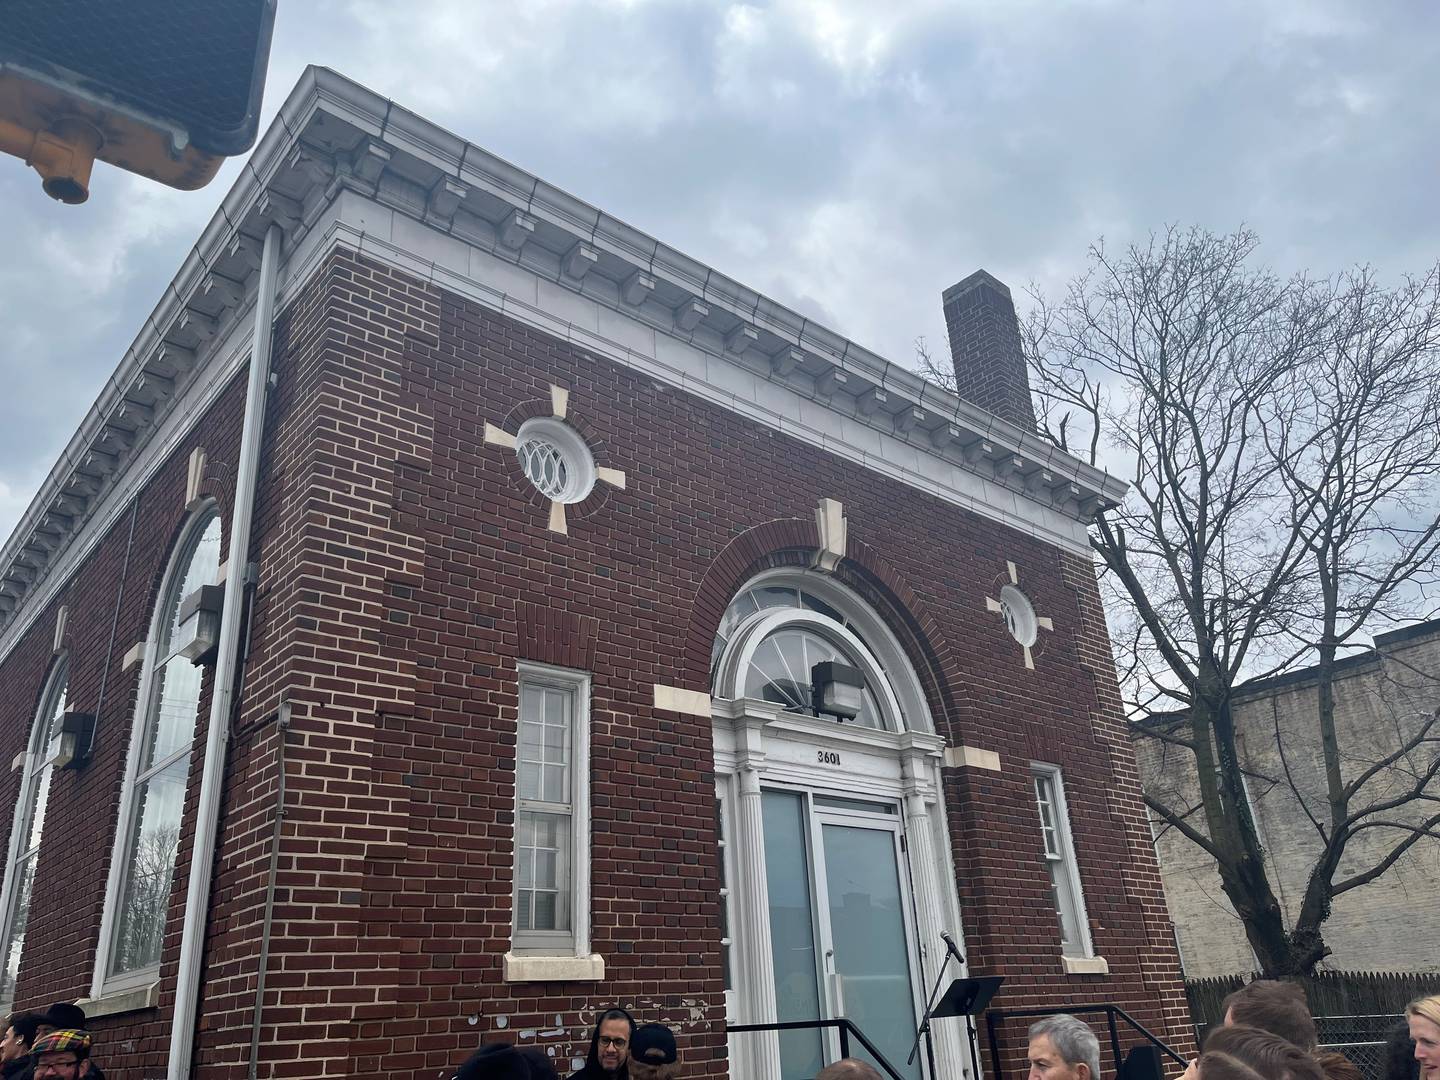 Bank of America donated its former Brooklyn branch building to the Greater Baybrook Alliance during a small ceremony on February 6.